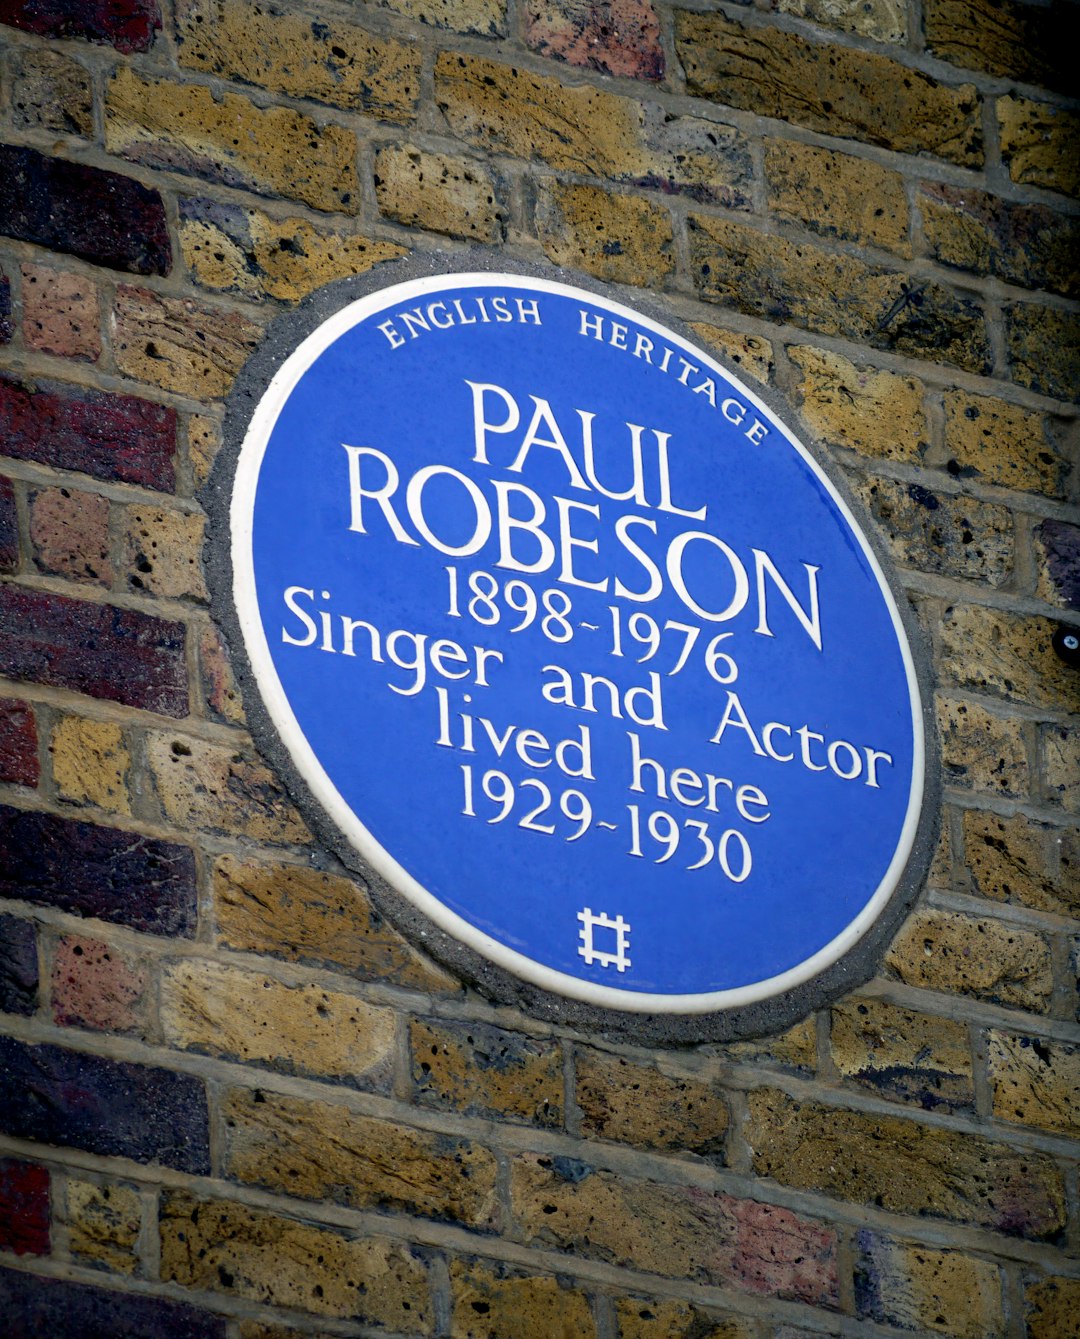 Paul Robeson signage